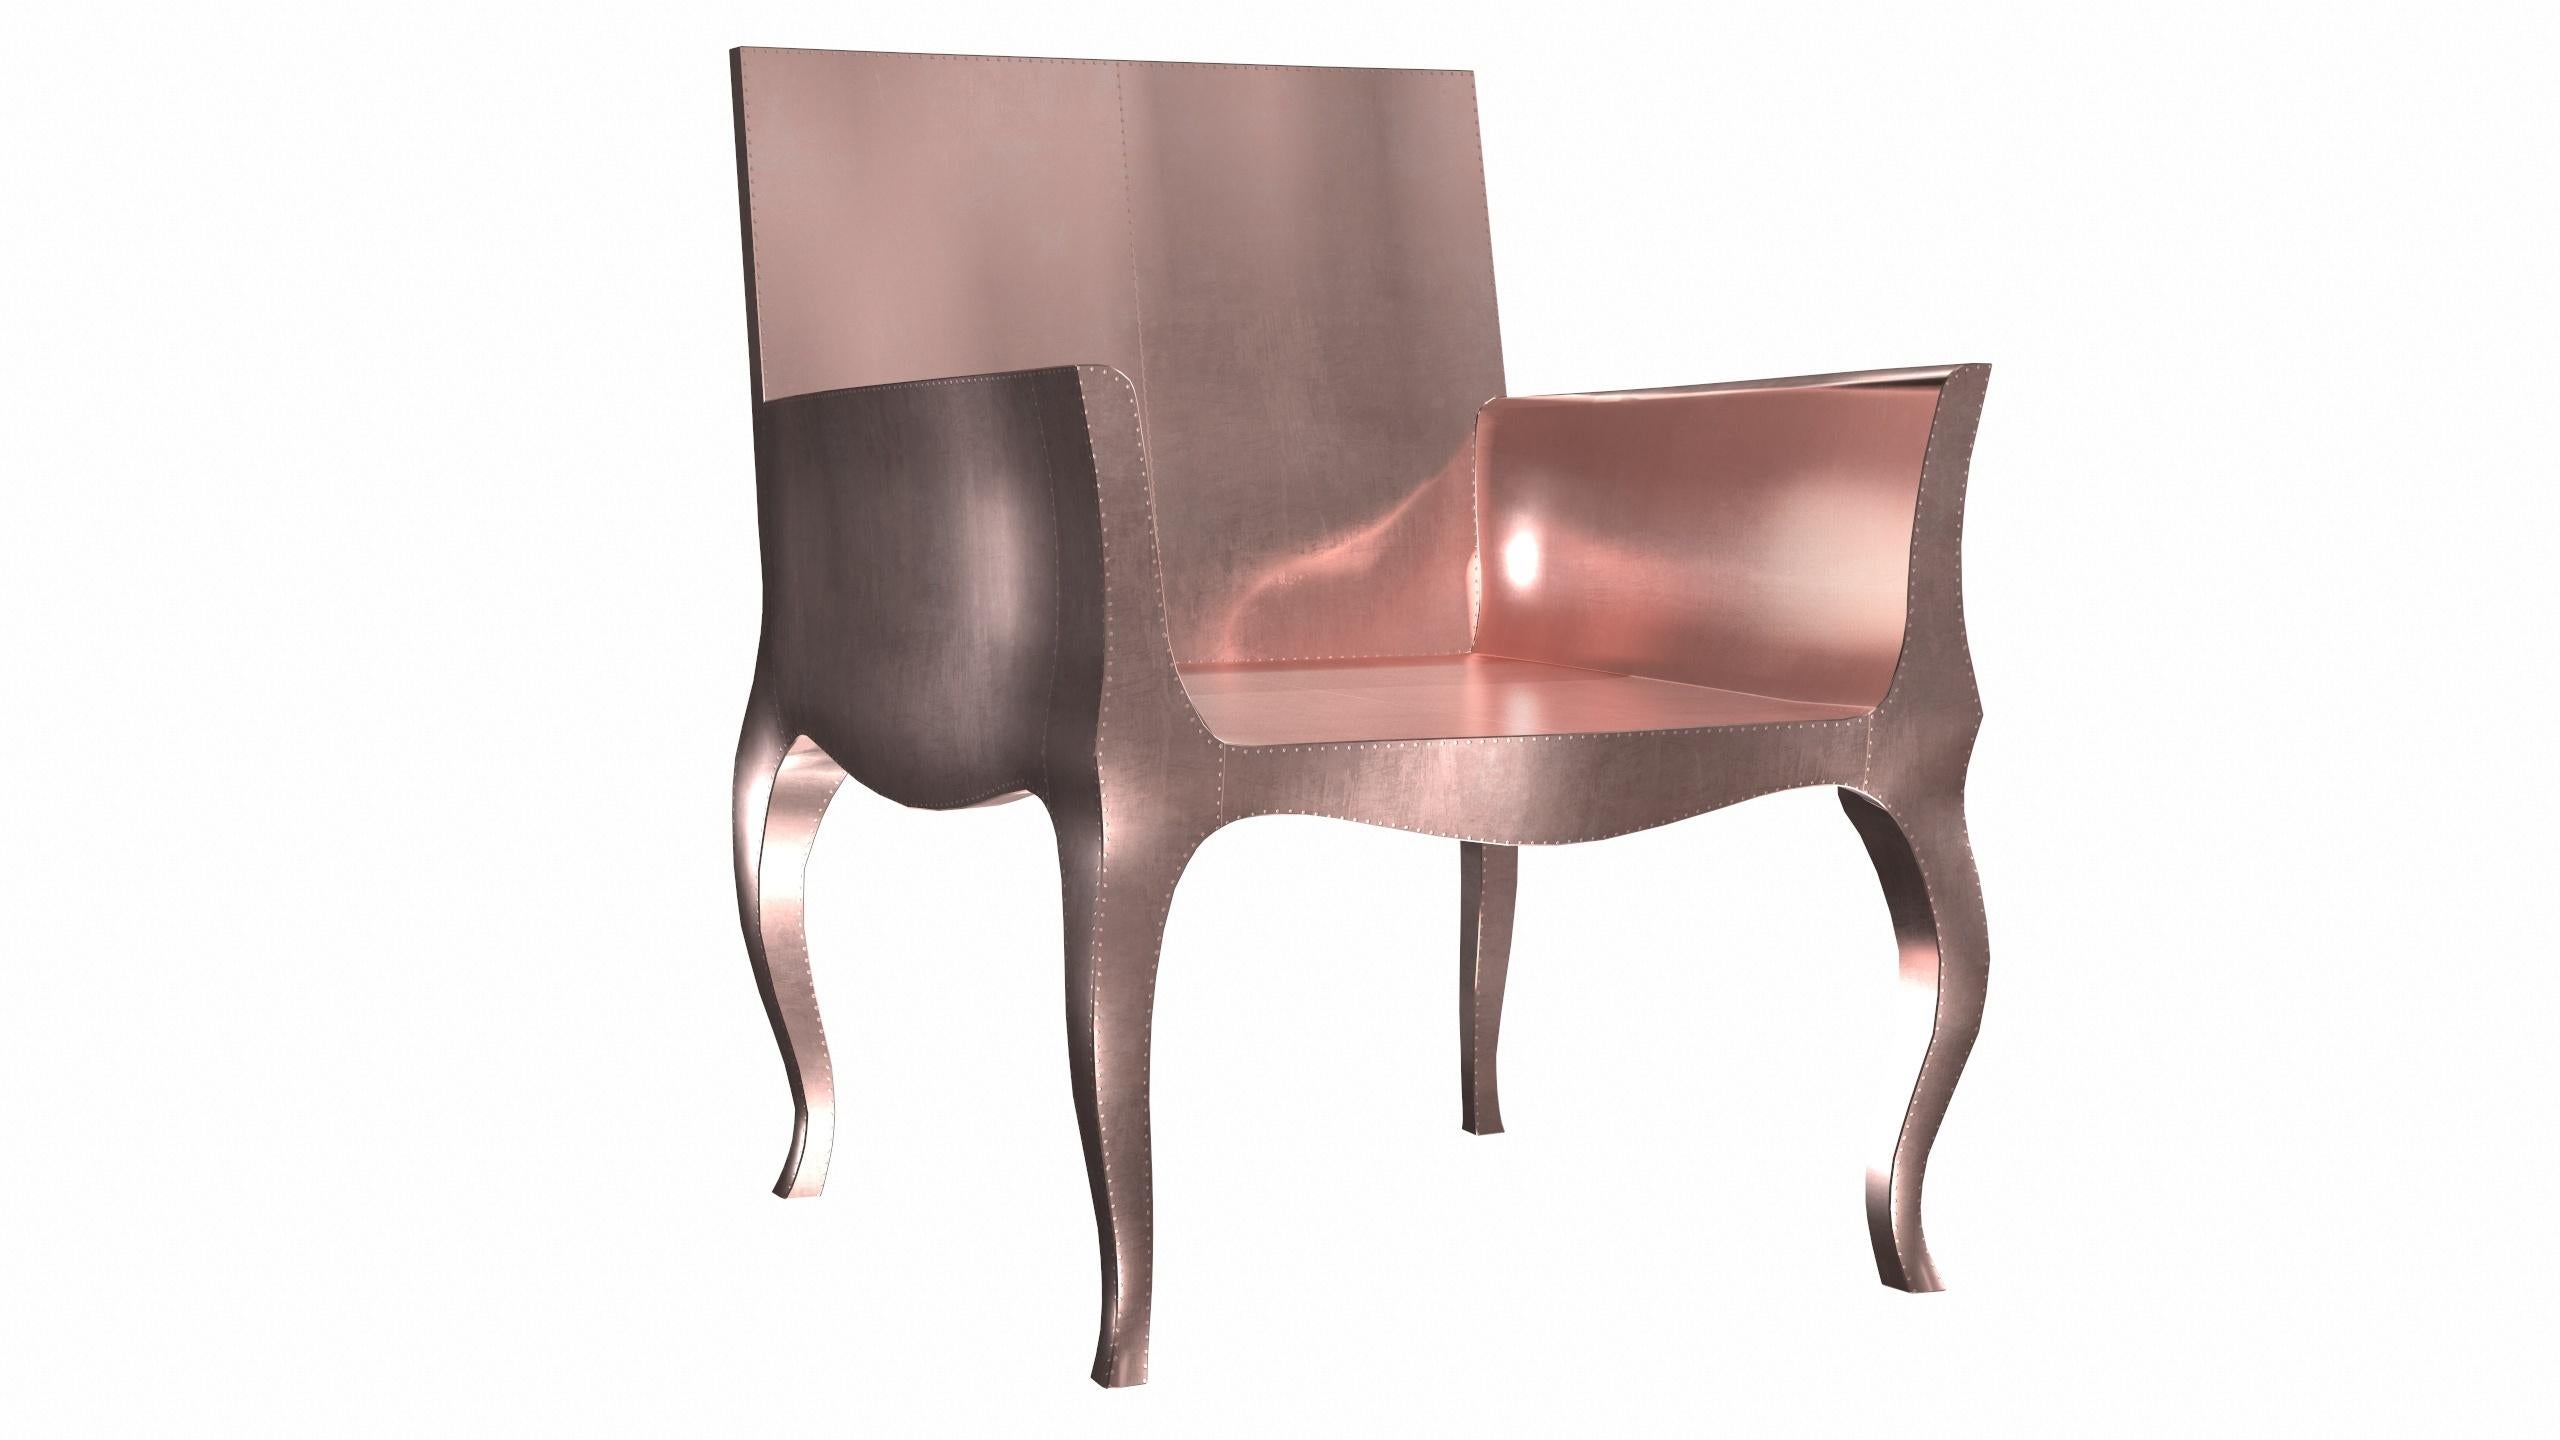 Antique Art Deco Chairs Smooth Copper by Paul Mathieu for S. Odegard In New Condition For Sale In New York, NY